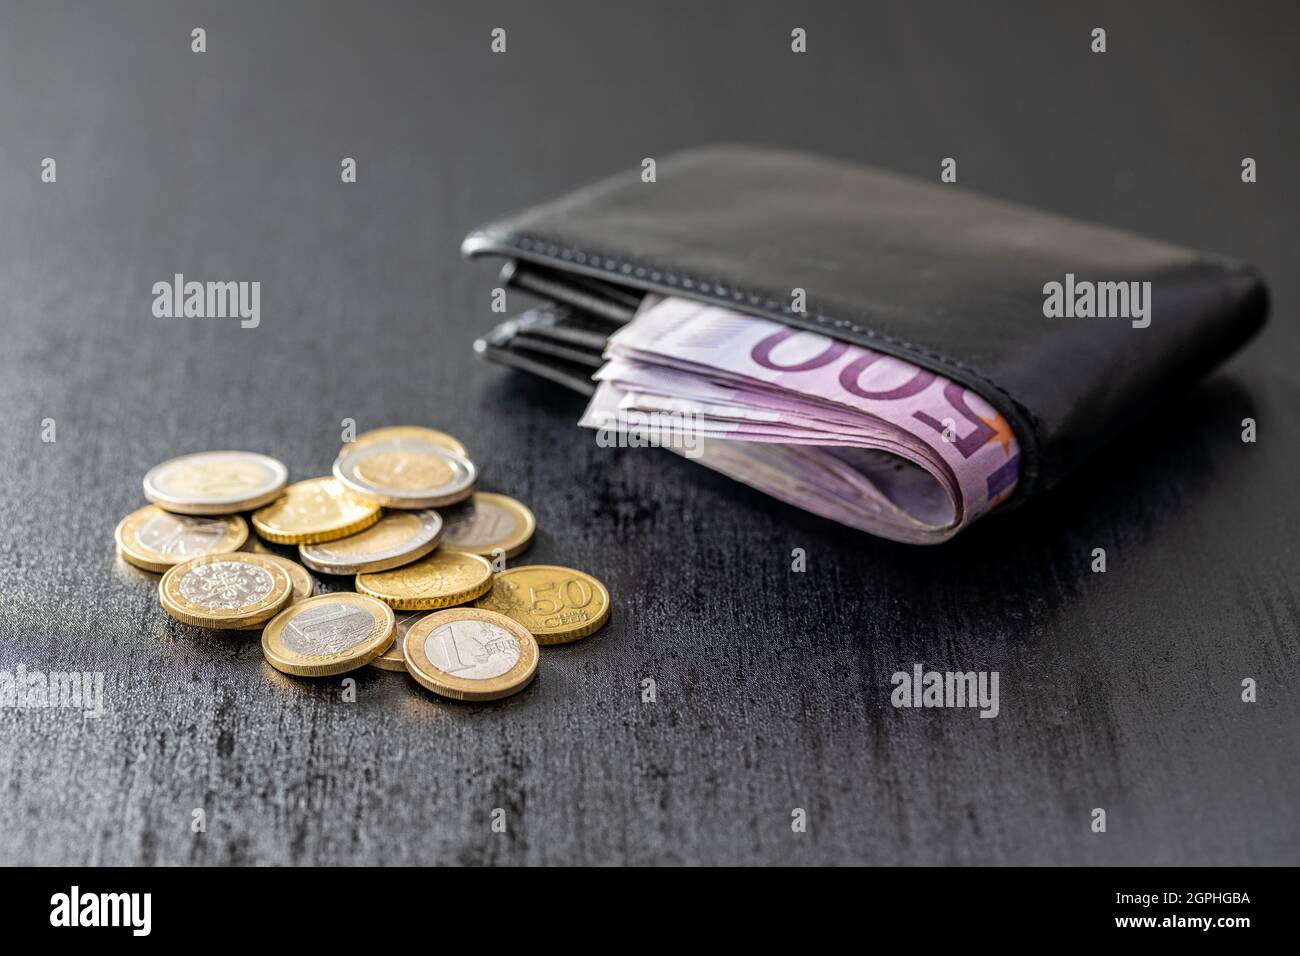 Leather wallet and euro money. Coins and paper banknotes. Stock Photo